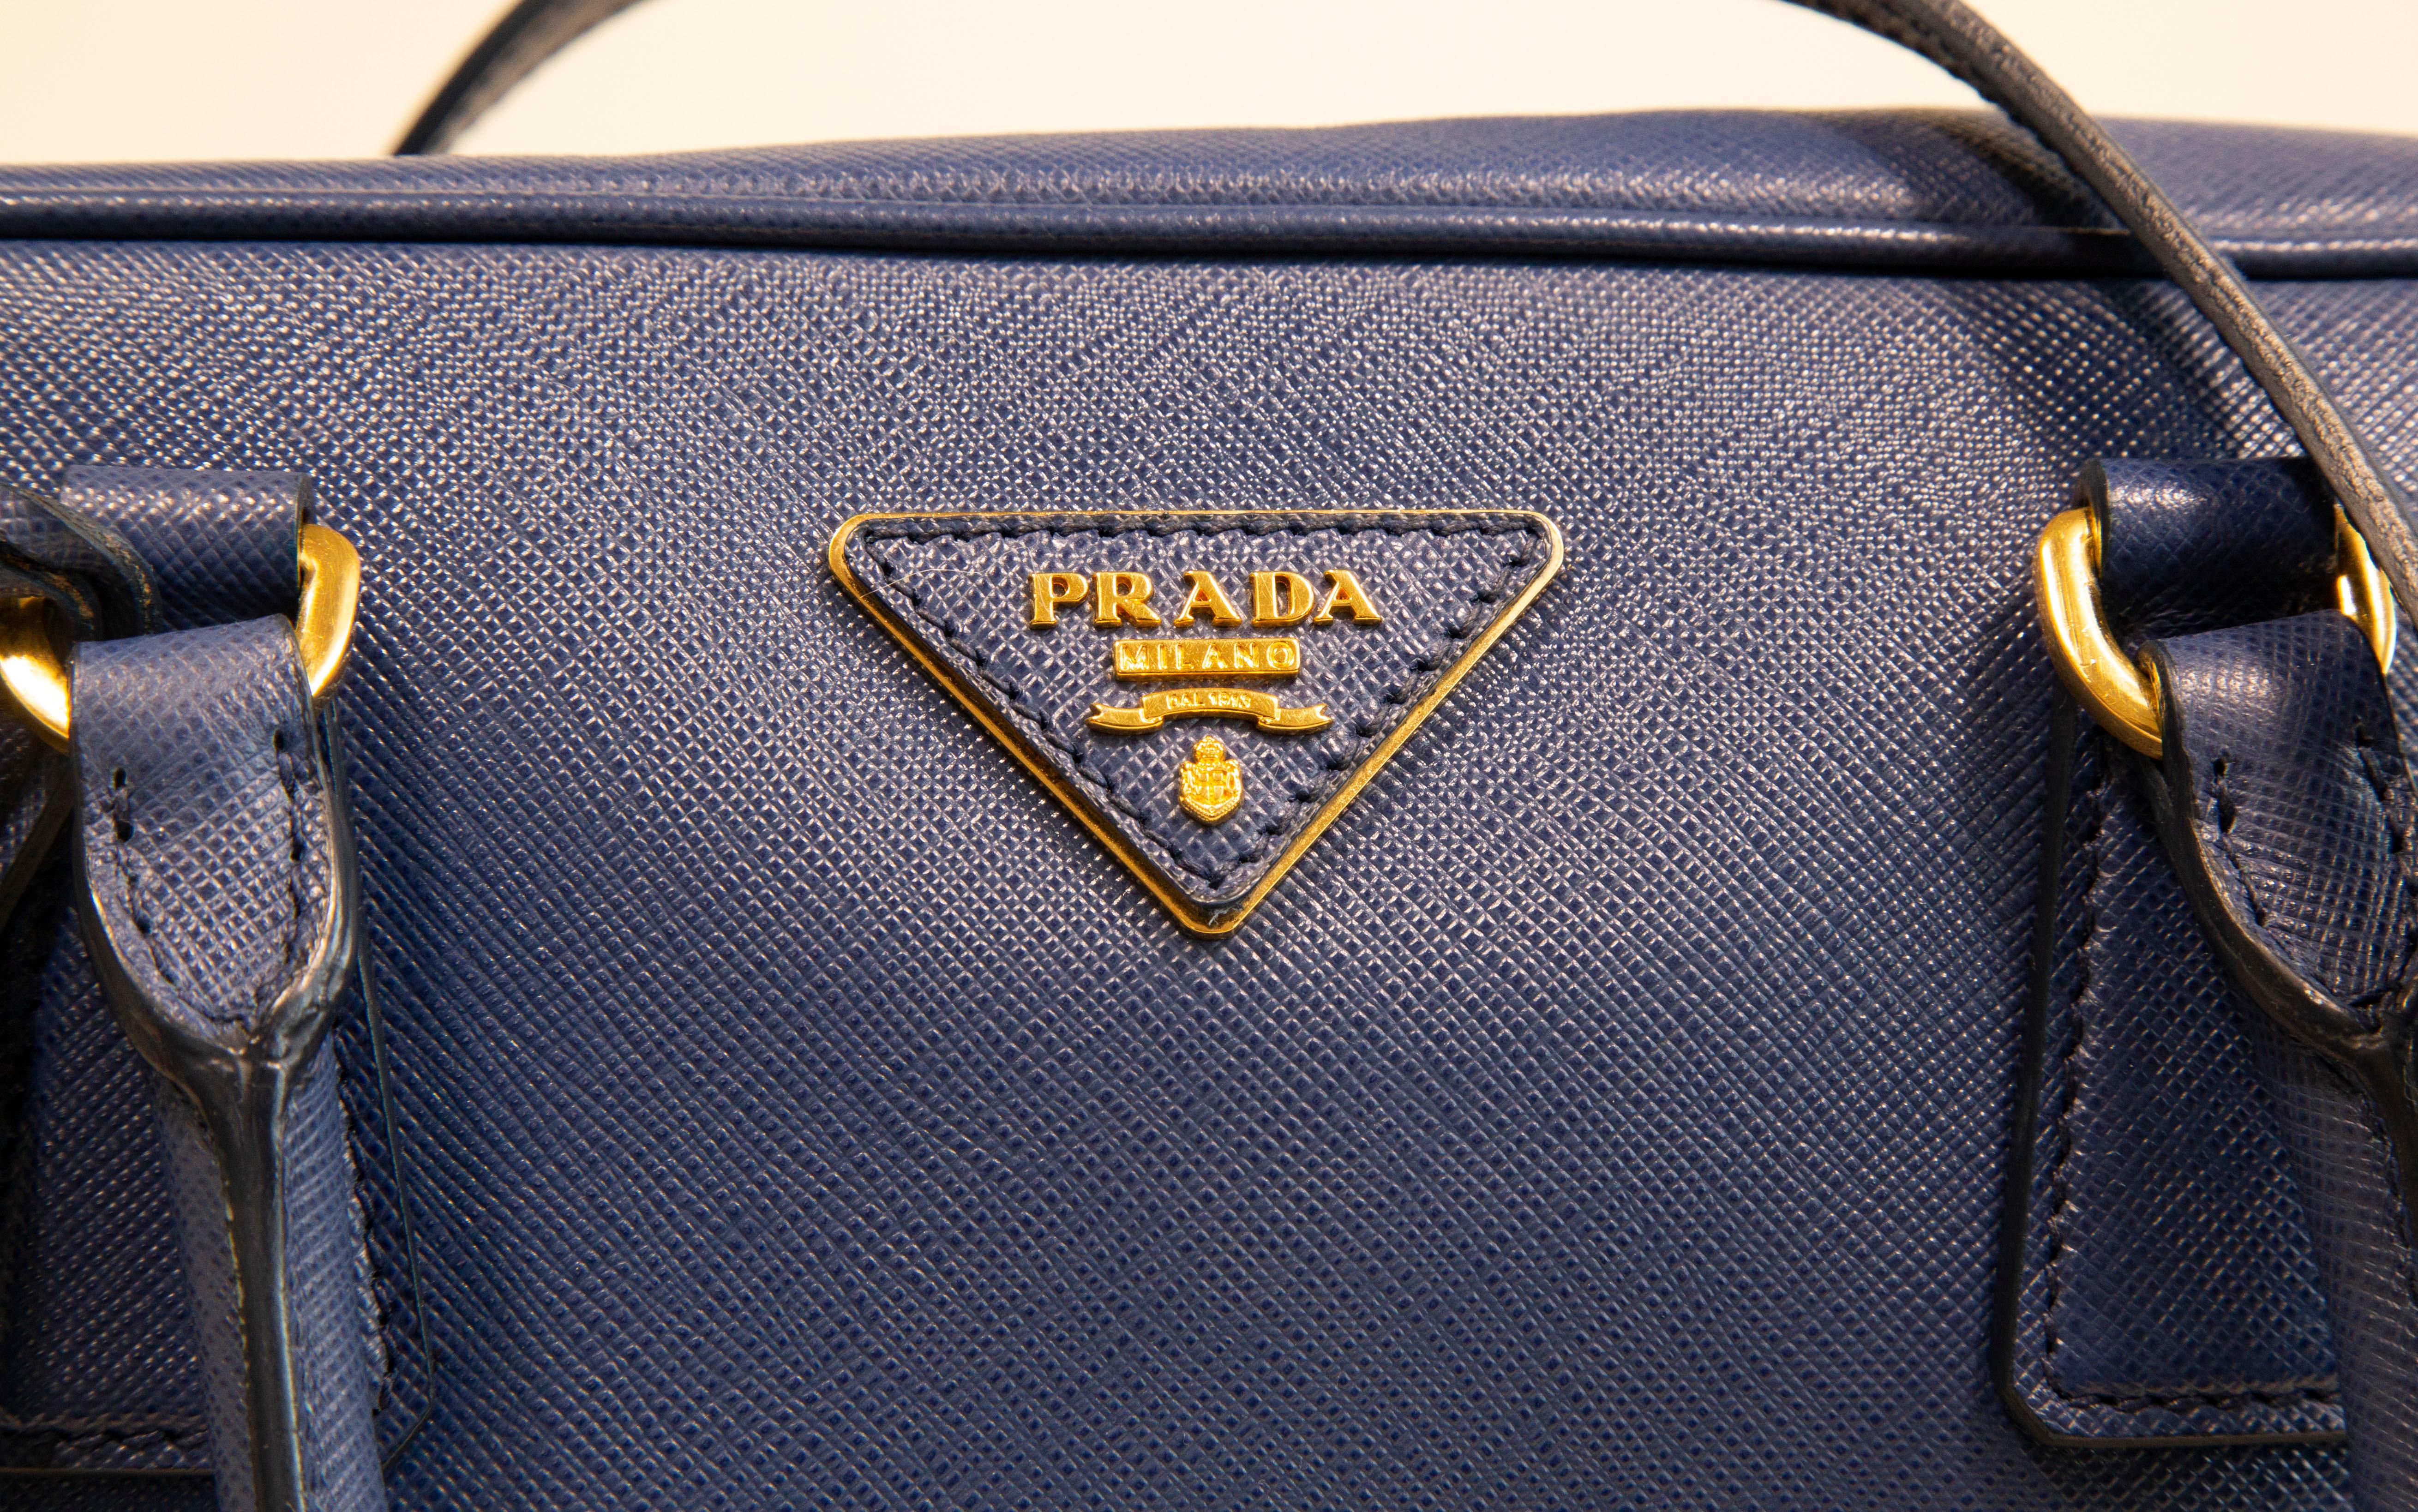 A Prada two way bag made of blue saffiano leather with gold toned hardware, The interior is lined with Prada logo synthetic fabric and next to the major compartment it features four side pockets of which one has a zipper. The bag can be worn as a